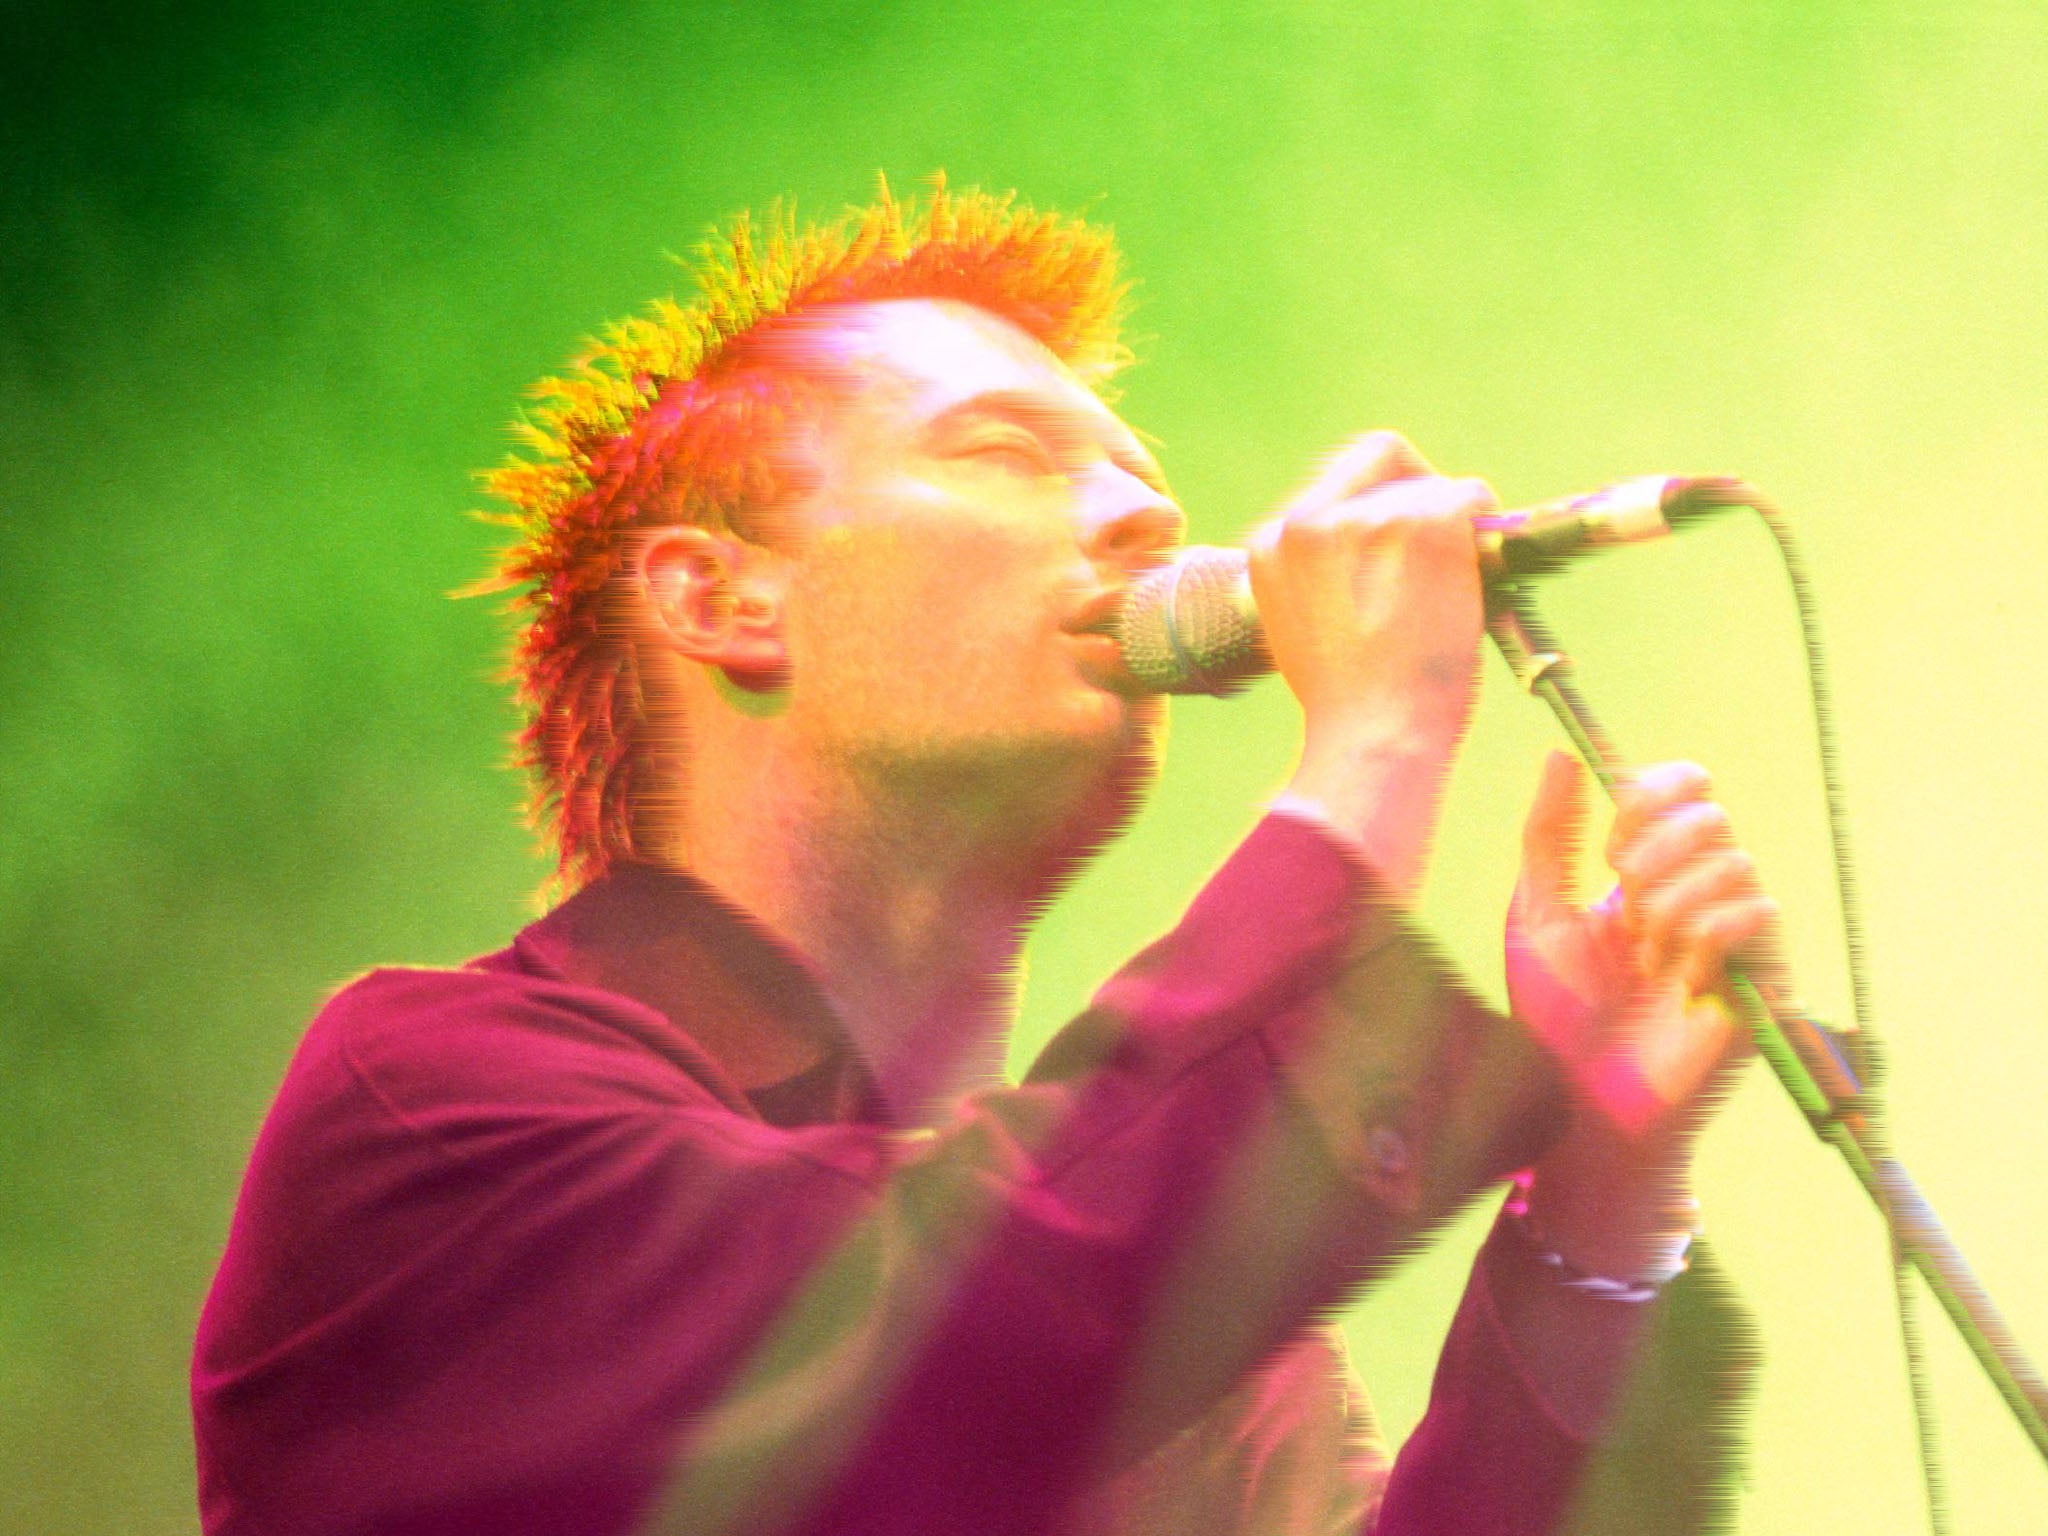 Slowed down, extra reverb and crackling vinyl: Radiohead’s Thom Yorke in concert in 1996